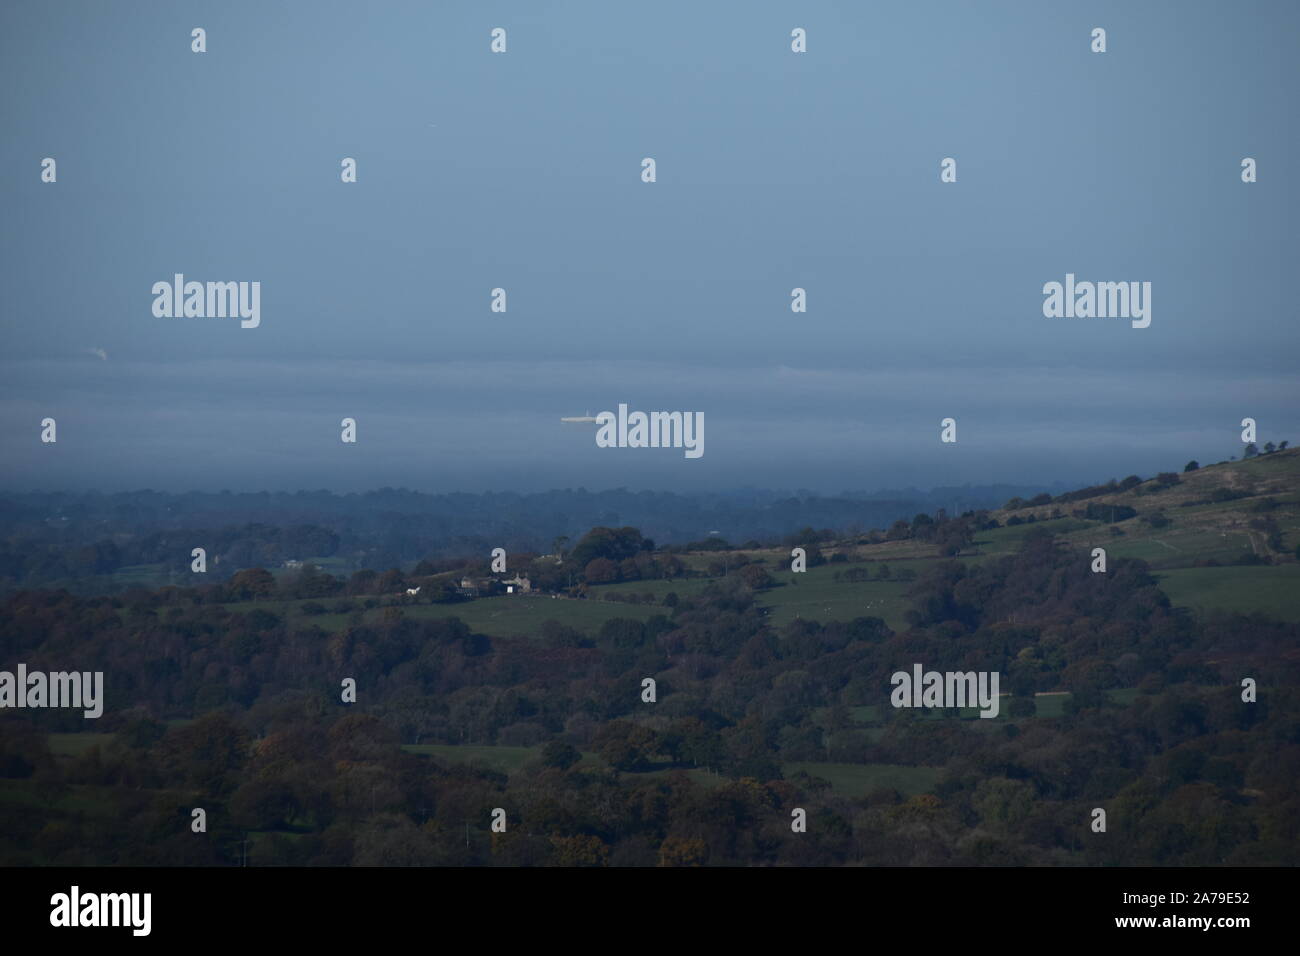 The dish of the Jodrell Bank telescope 'floating' in the distant clouds. Stock Photo